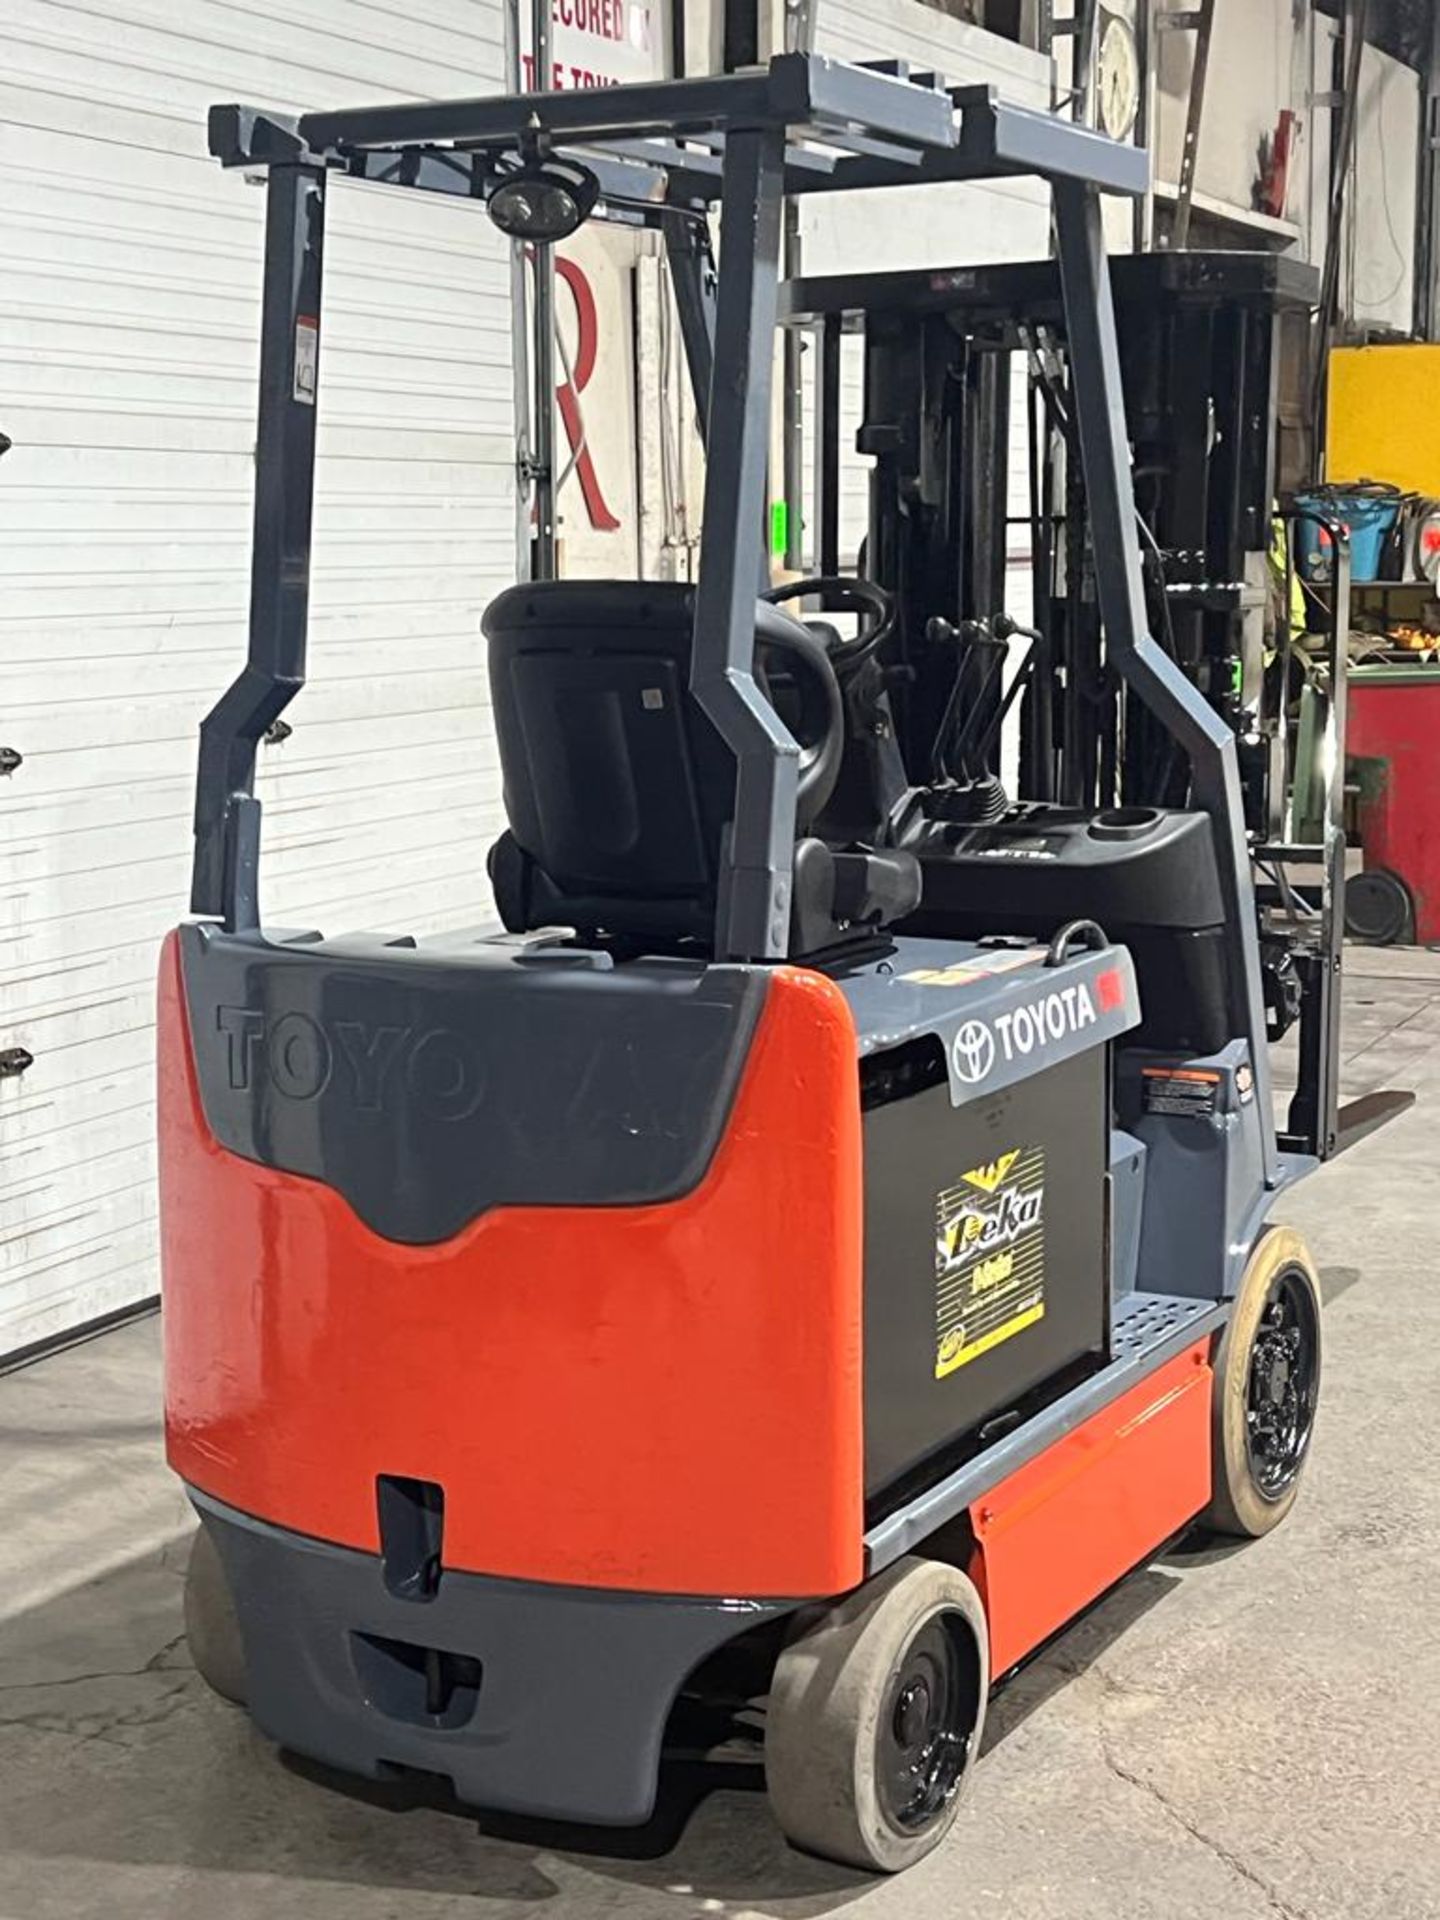 Toyota 5,000lbs Capacity Forklift Electric 48V battery with 4-STAGE MAST Sideshift - Image 3 of 3